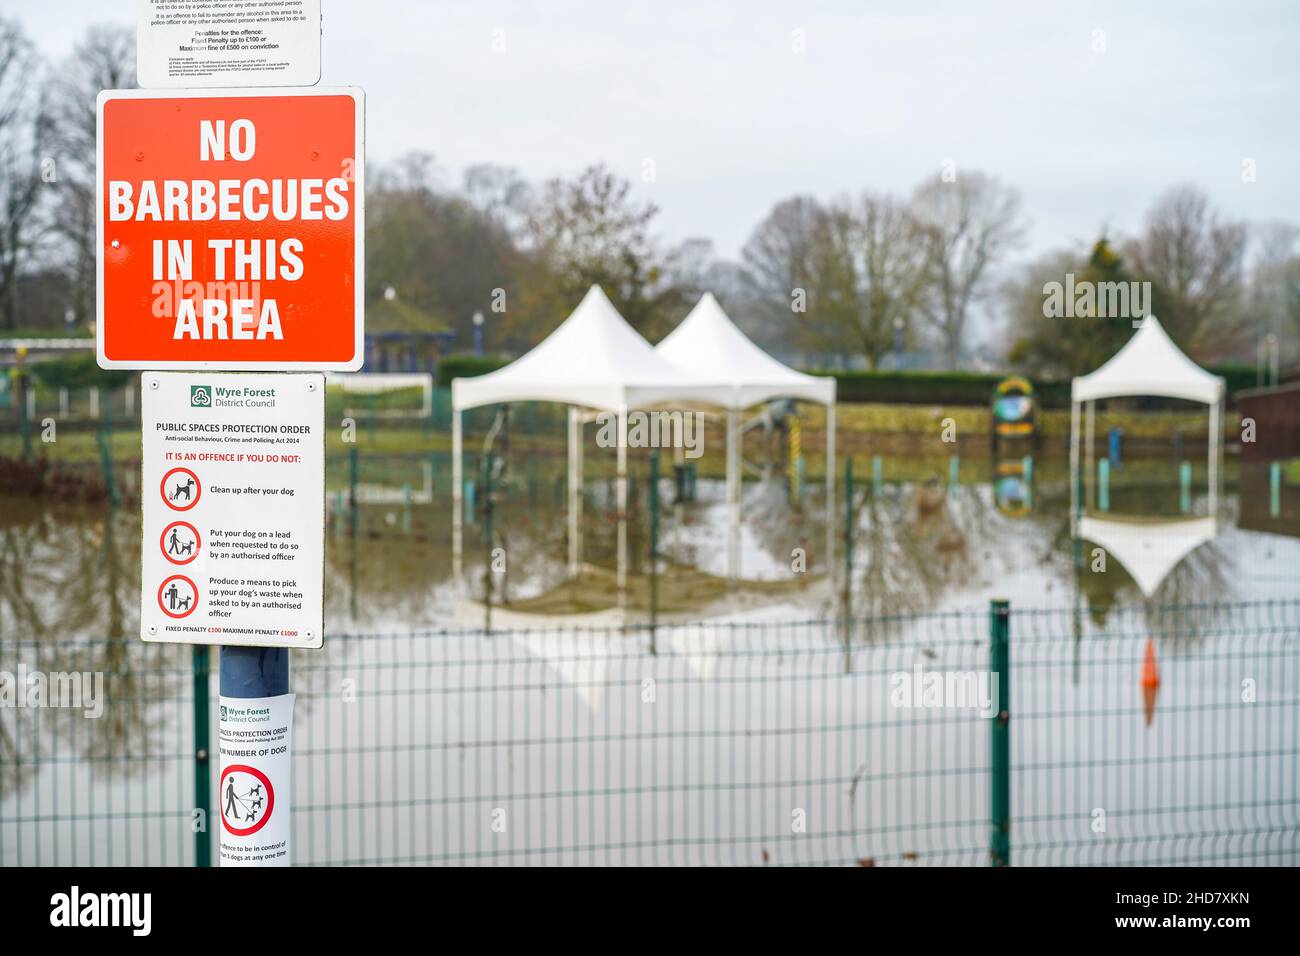 'No Barbecues in this area' sign overlooking the flooded public park in Stourport-on-Severn, Worcestershire, UK, due to River Severn flooding. Stock Photo